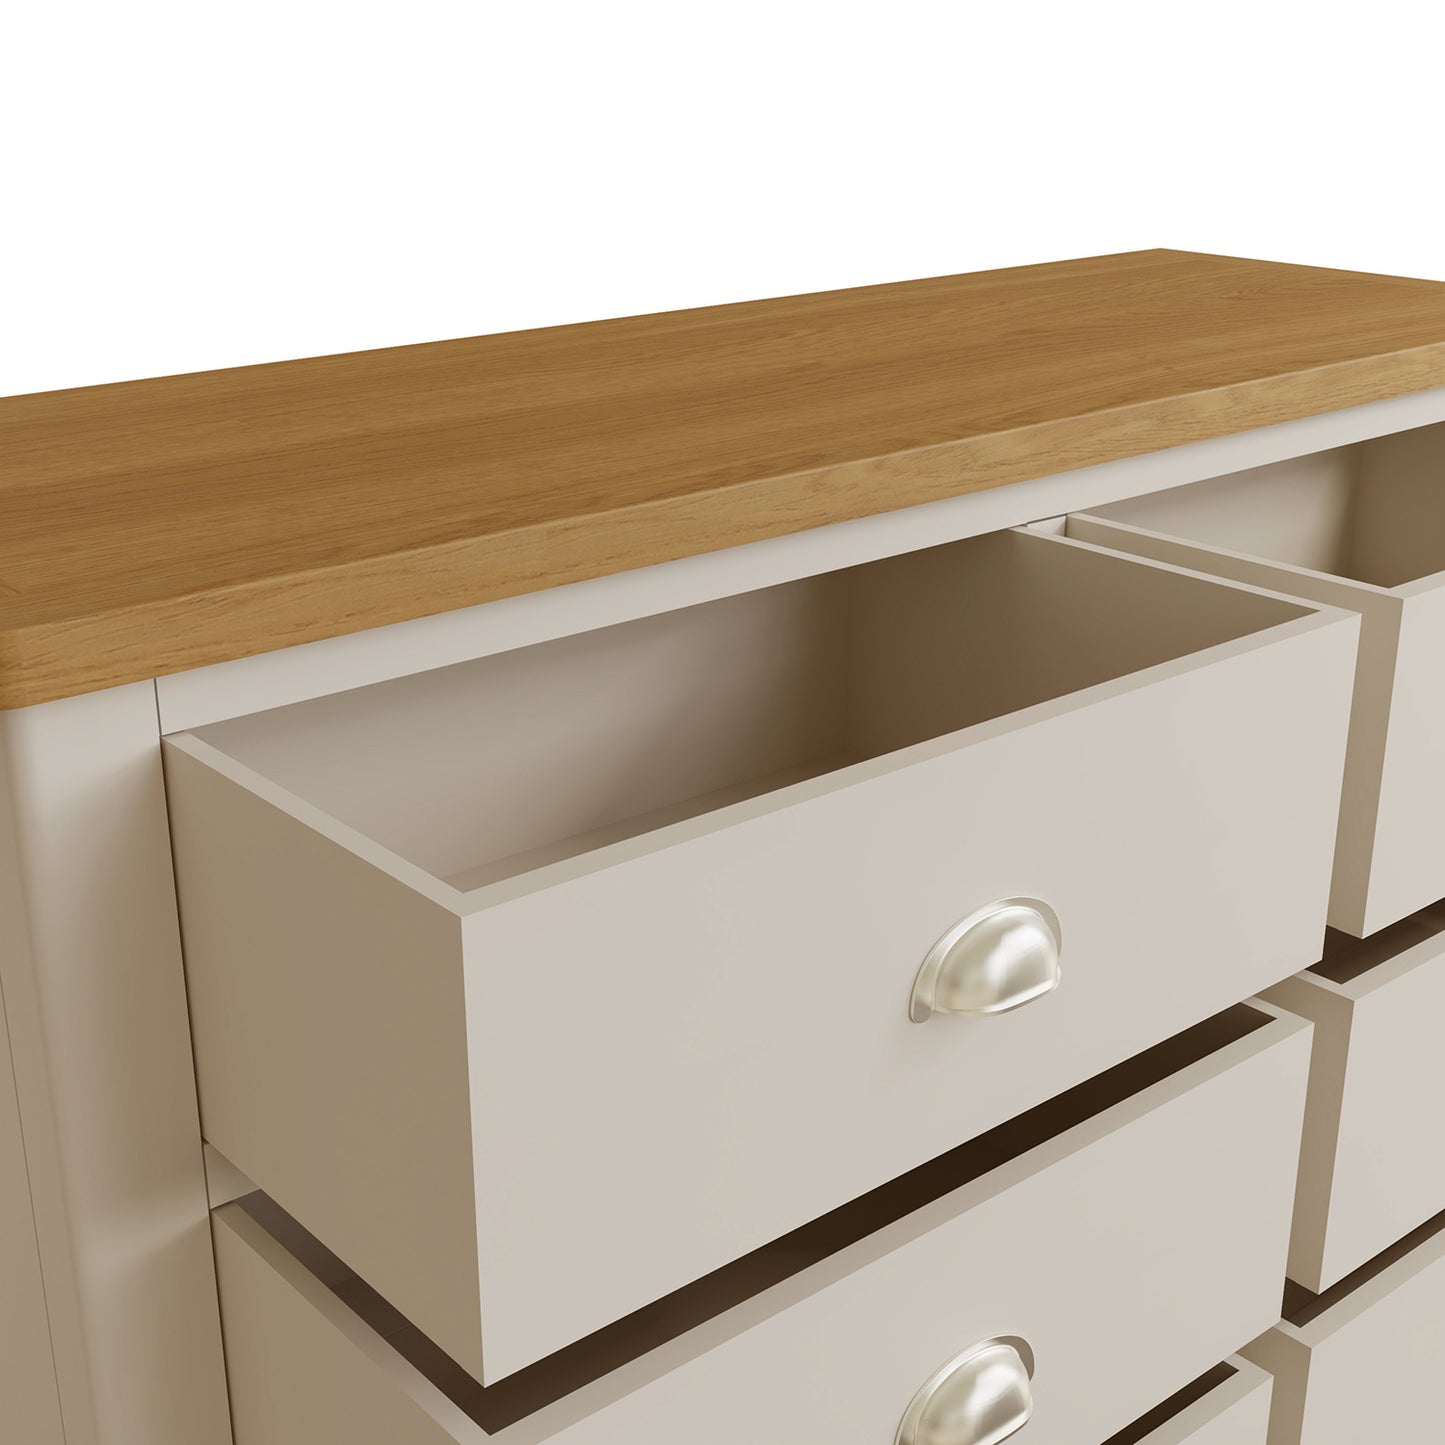 Pershore Painted Chest of Drawers - 6 Drawer